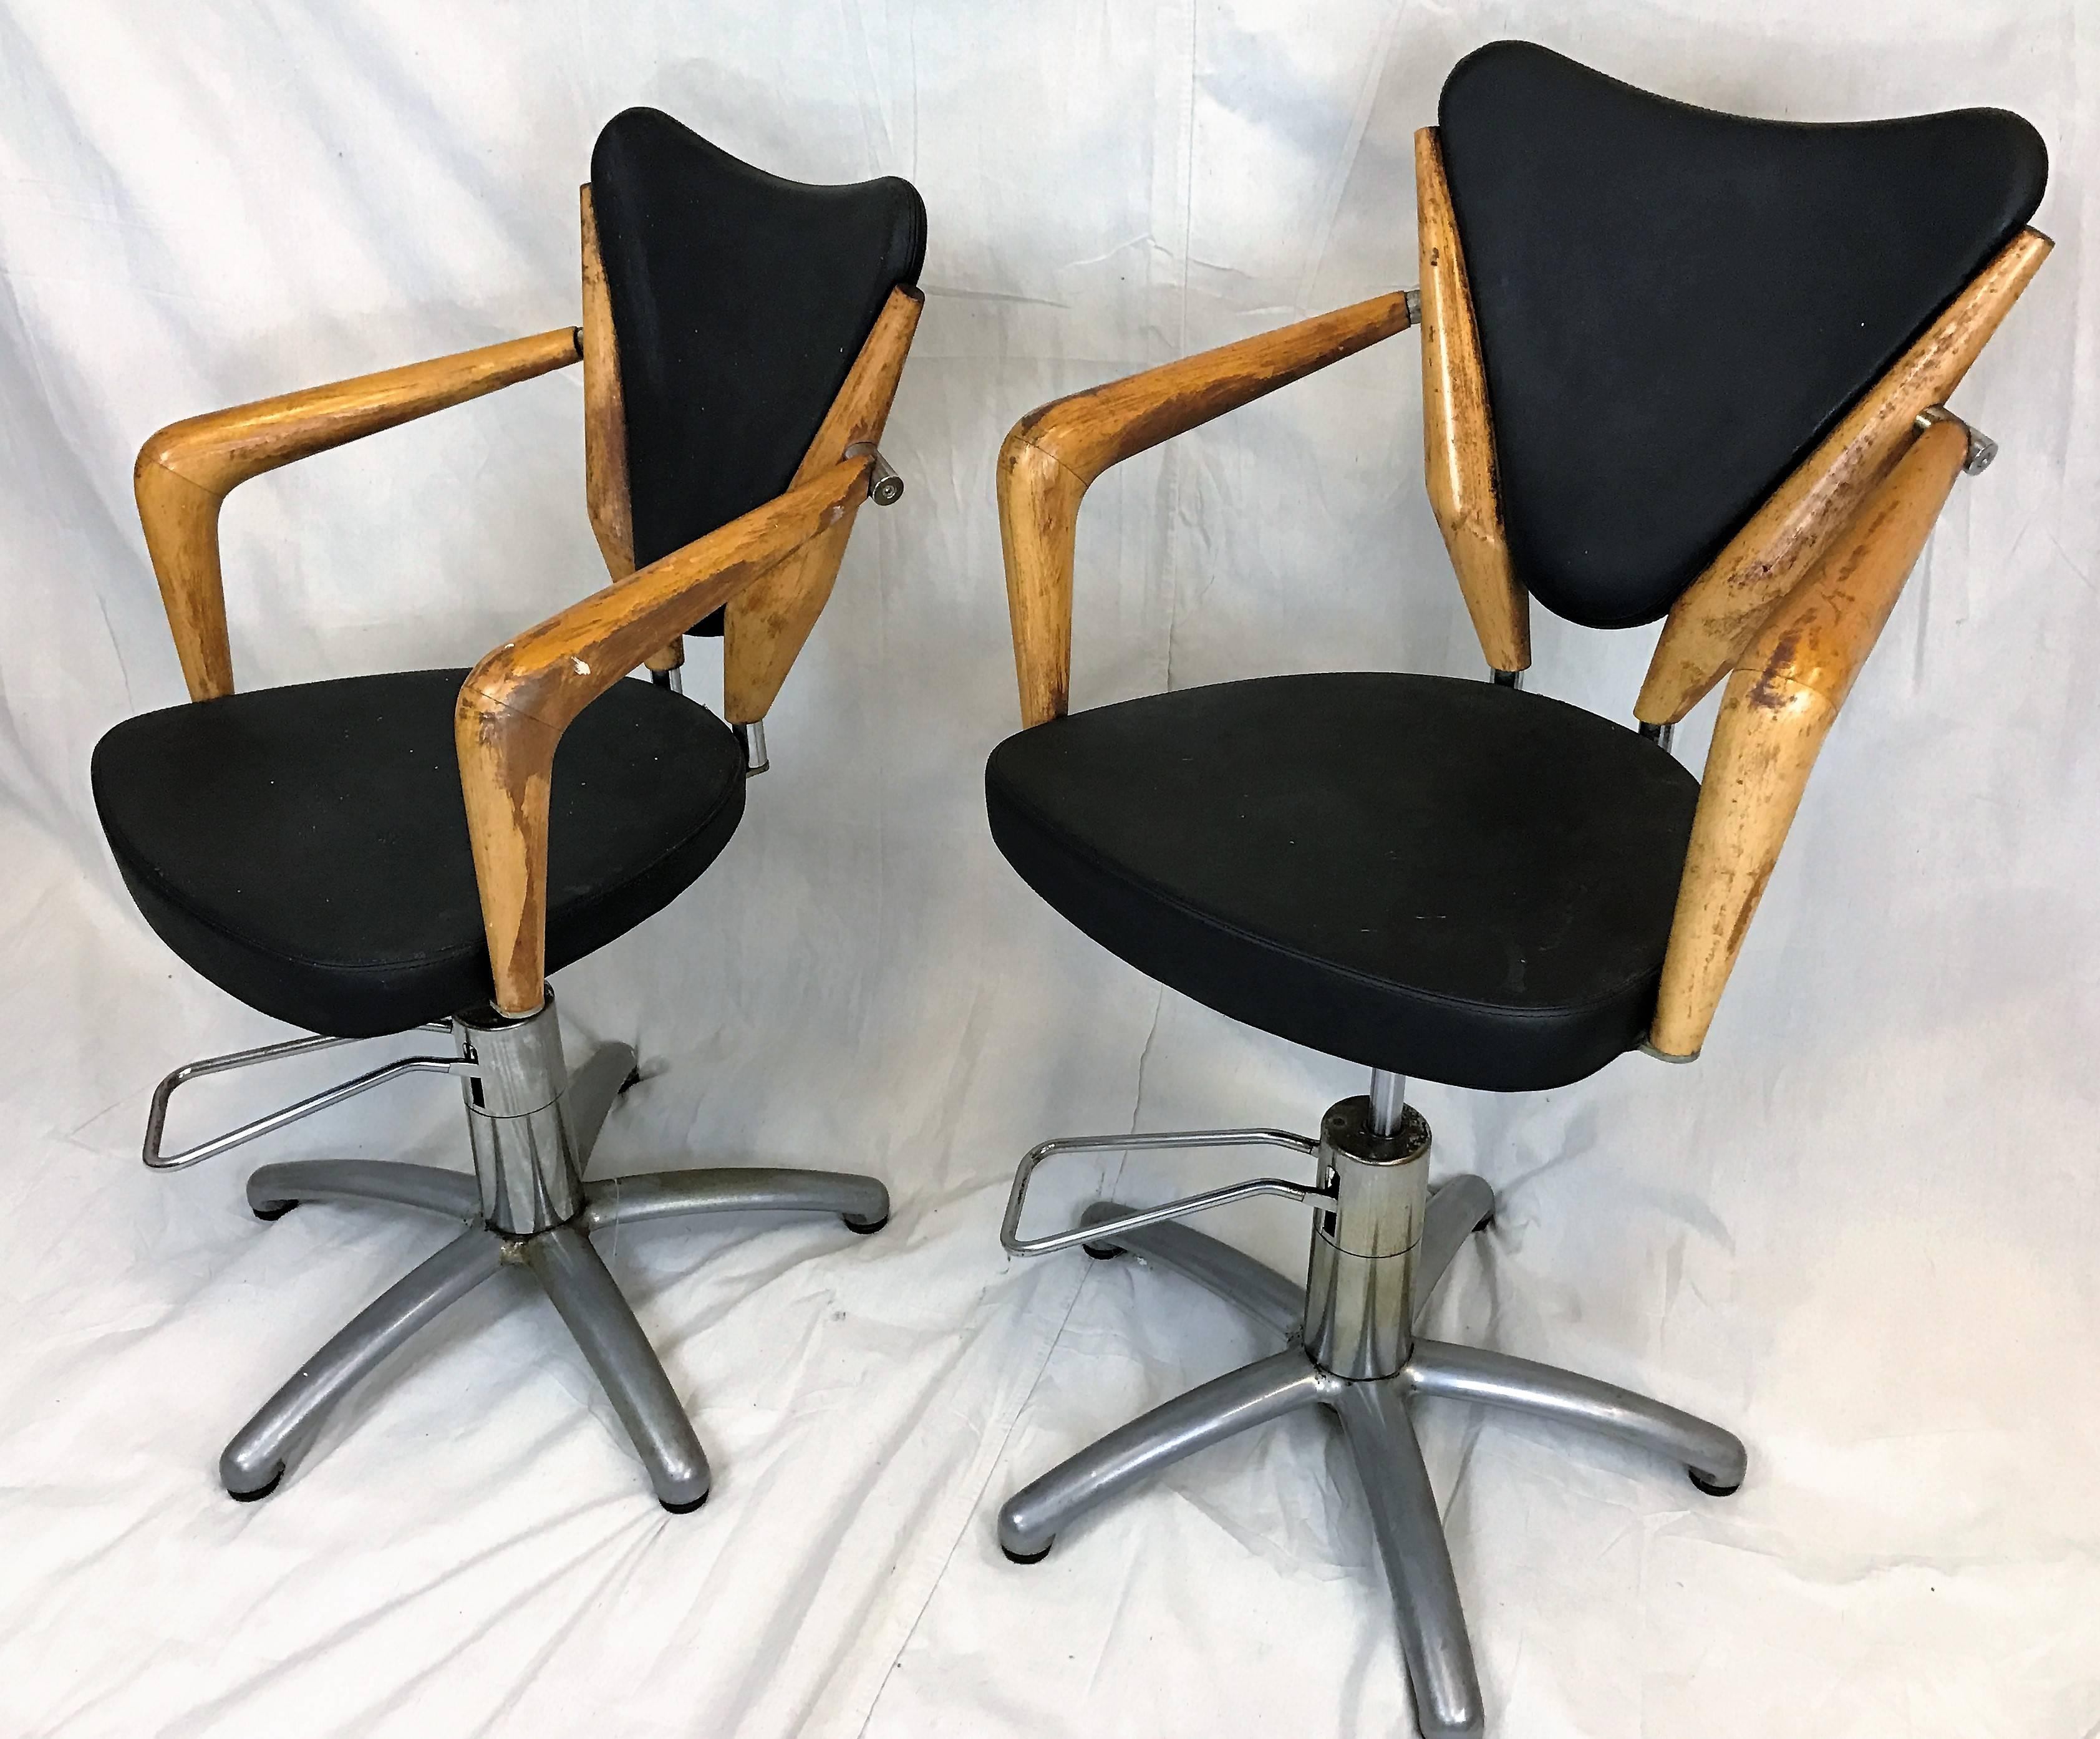 A pair of rare Italian hydraulic salon chairs with chrome and wood frame. Faux leather upholstered seats. Measurements when seat at full height 25